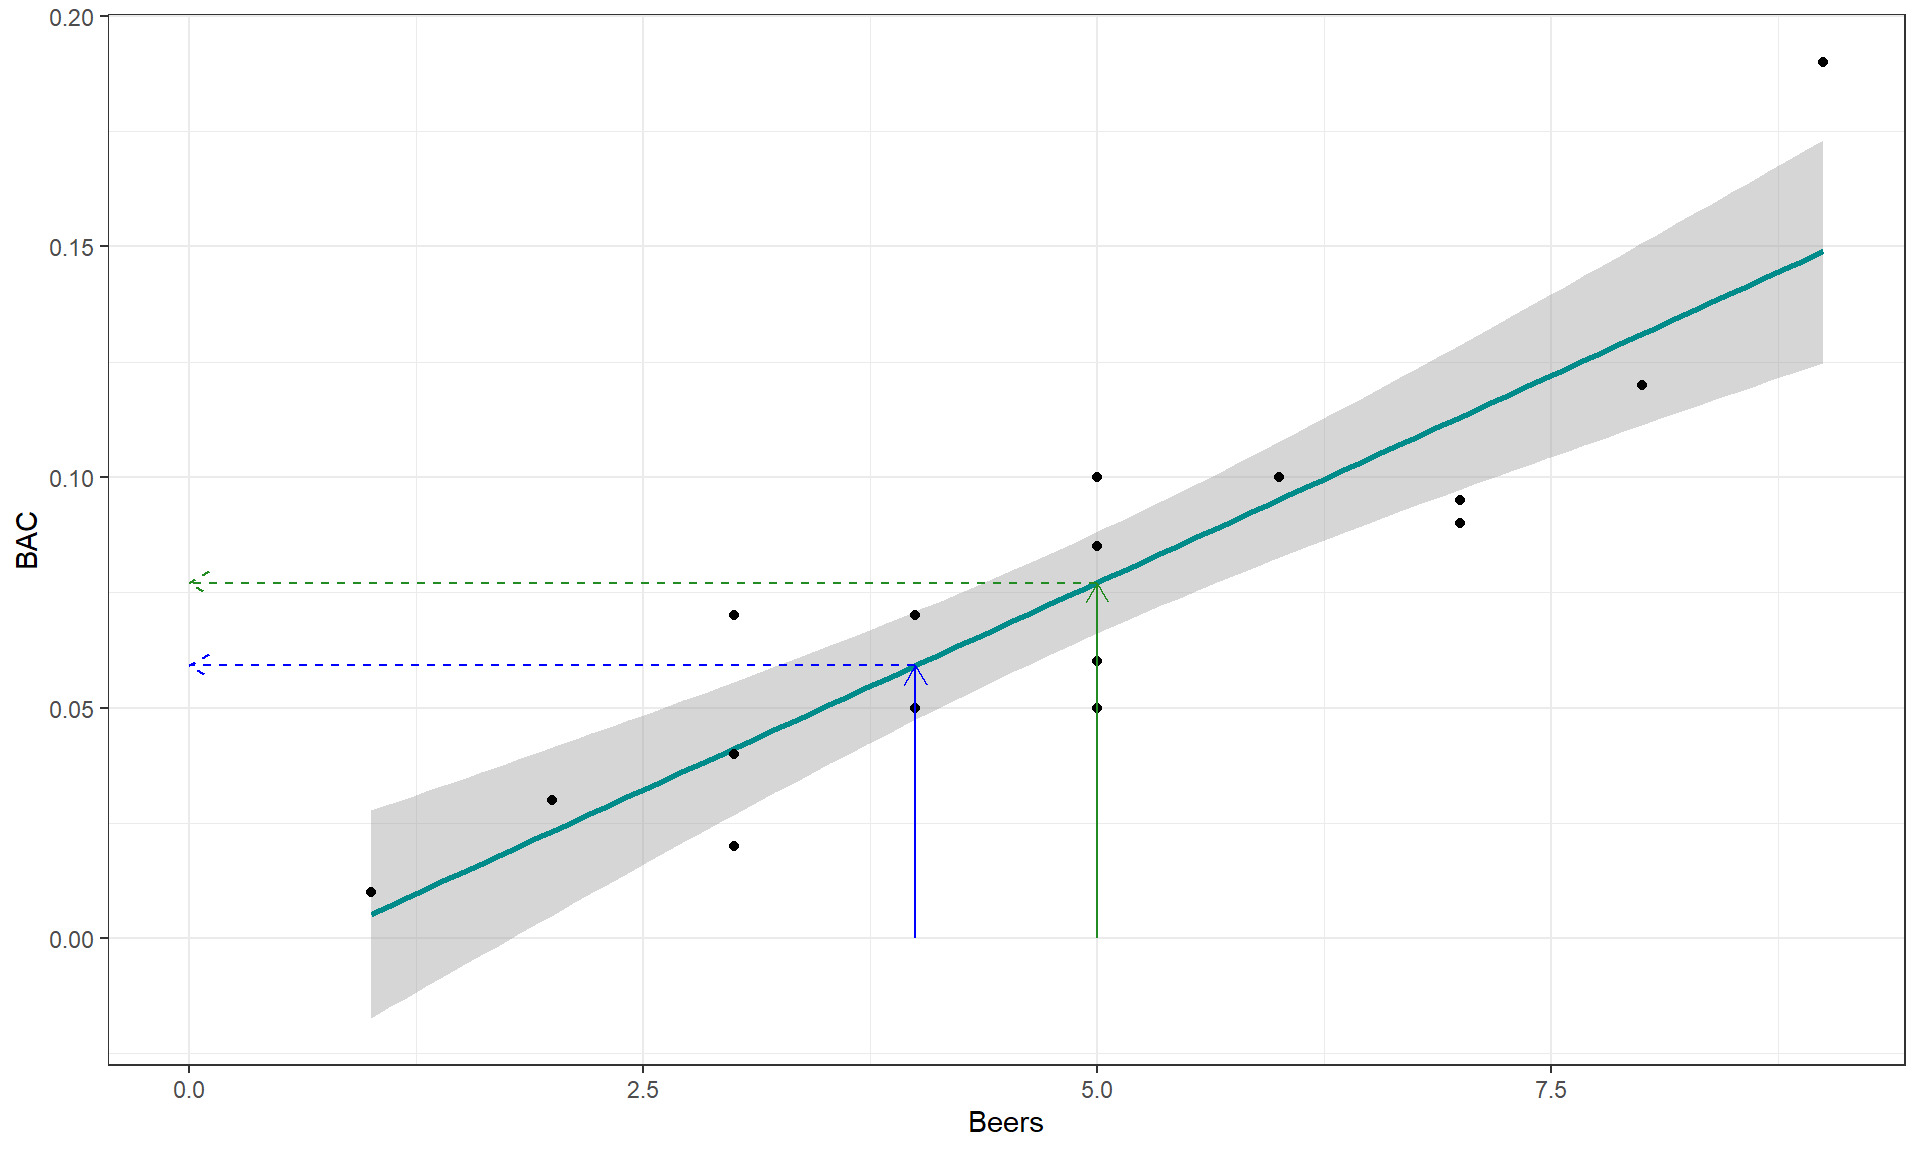 Scatterplot with estimated regression line (solid line) for the Beers and BAC data. The solid arrows indicate the predictor variable values of 4 and 5 beers and the dashed lines illustrate the predicted mean BAC for 4 and 5 beers consumed based on the SLR model.